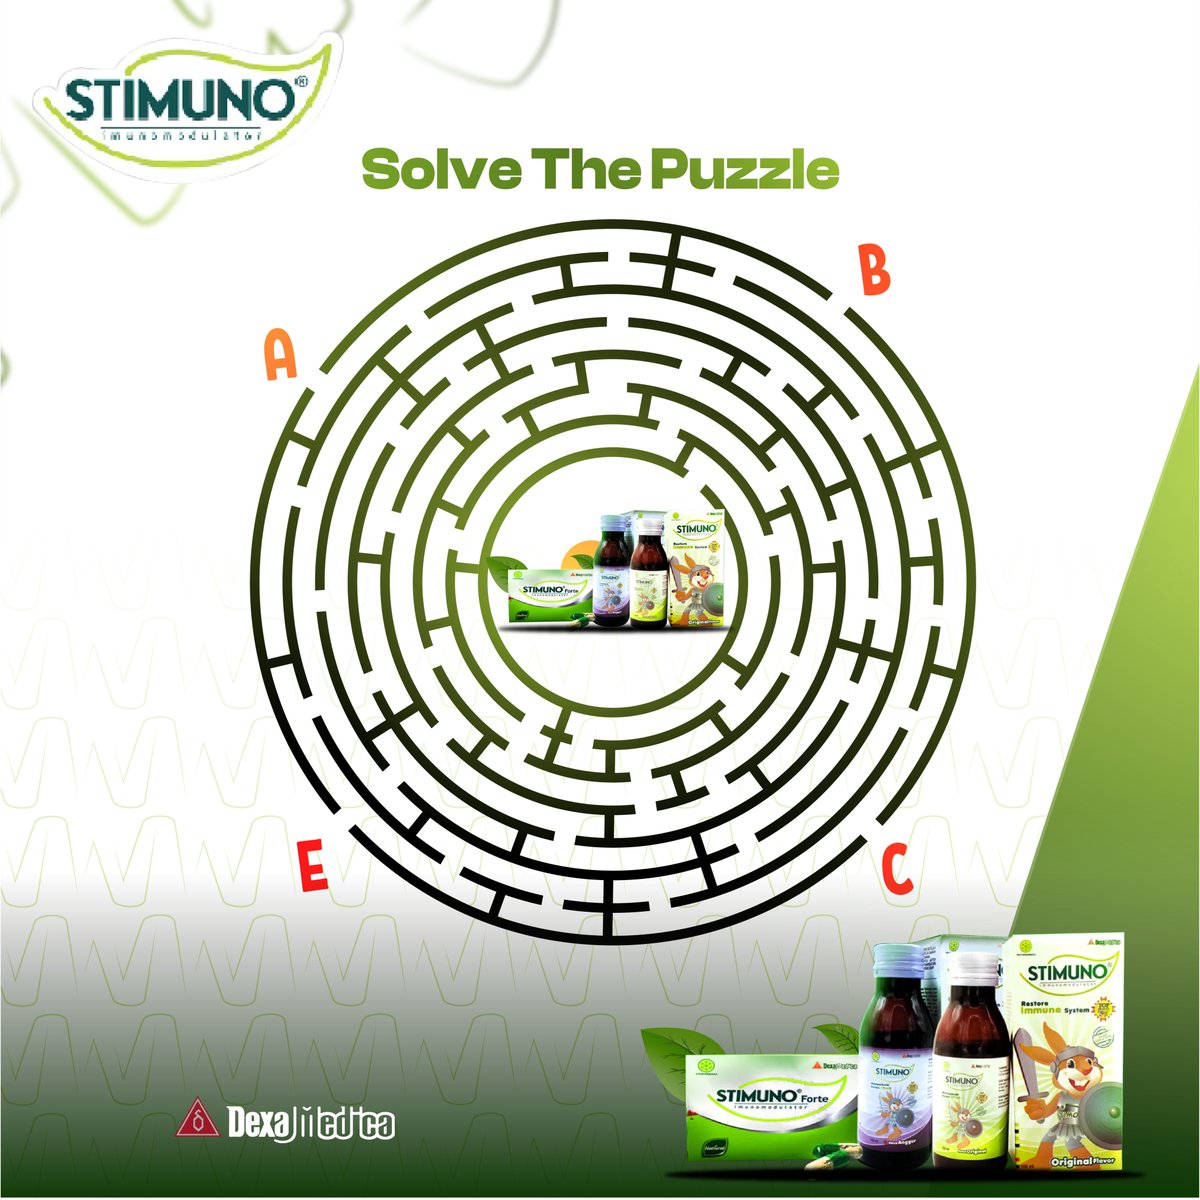 Boost your immune and your brain this weekend! Join our exciting Stimuno puzzle challenge and stand a chance to win a recharge card! It’s fun, it’s engaging, and it’s rewarding! 💡✨

#immunesystem #ImmuneBooster #Stimuno #healthylife #trivia